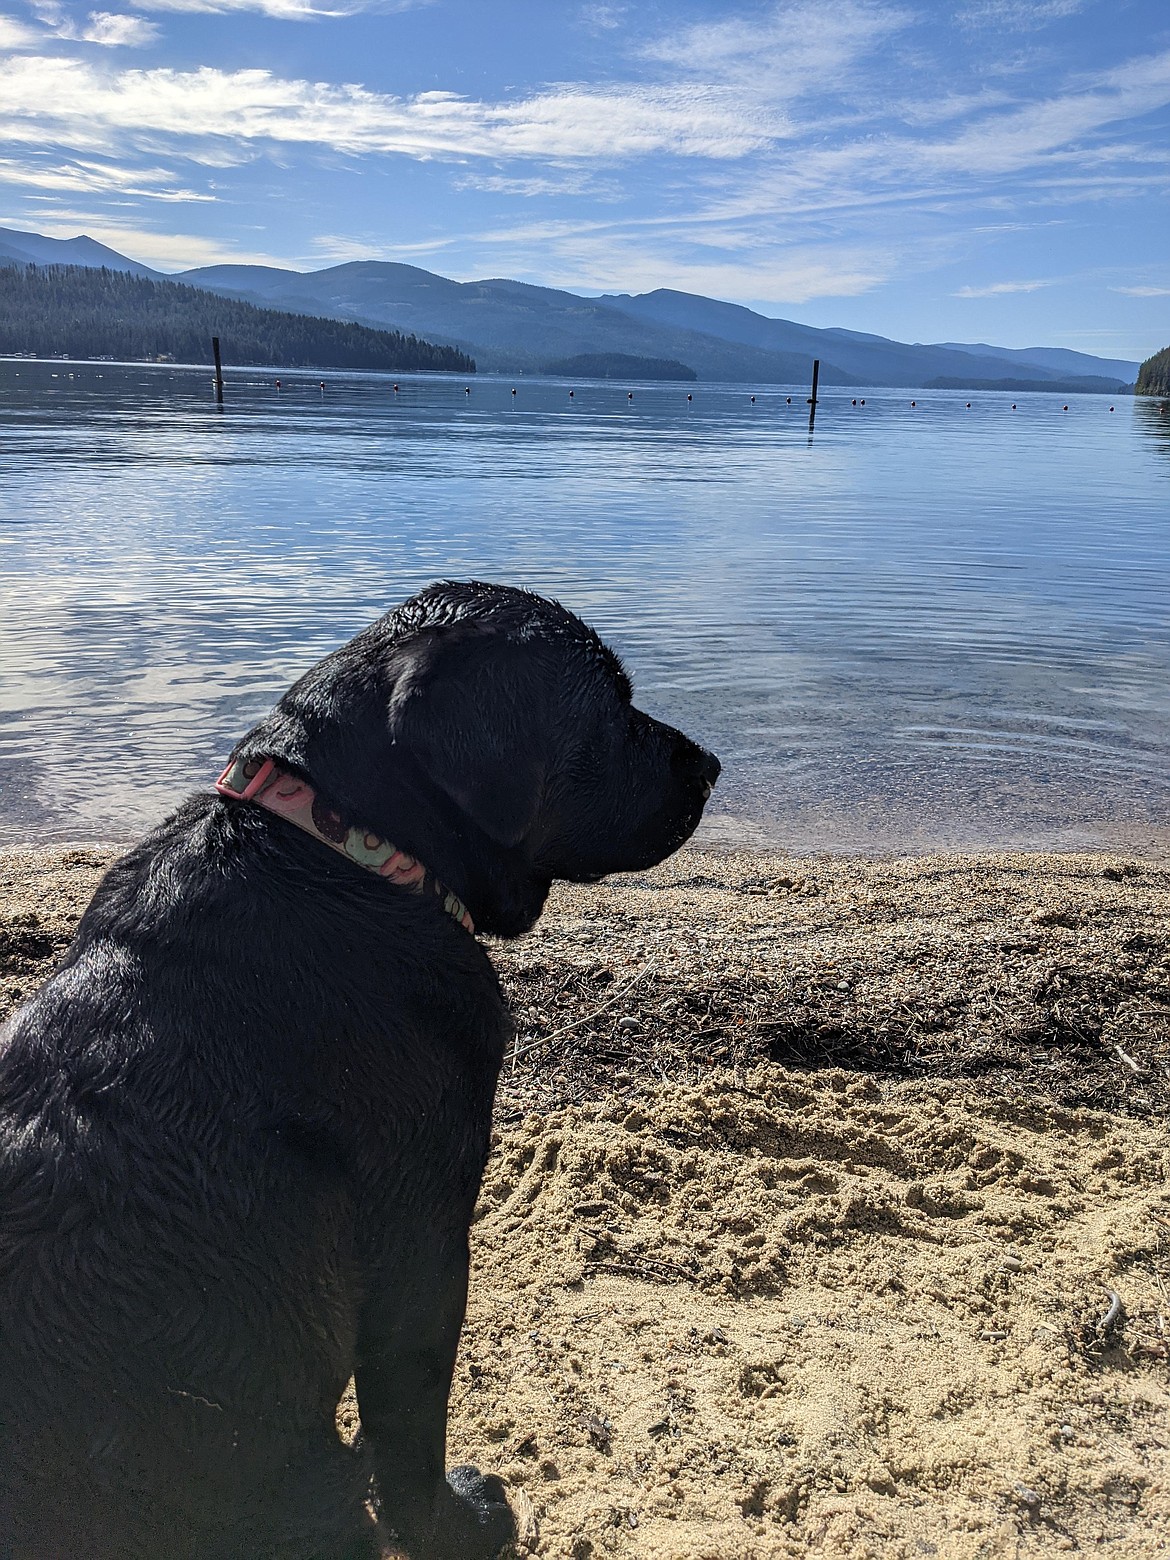 Kathy Salvaore enjoyed this moment at Priest Lake during summer 2022.